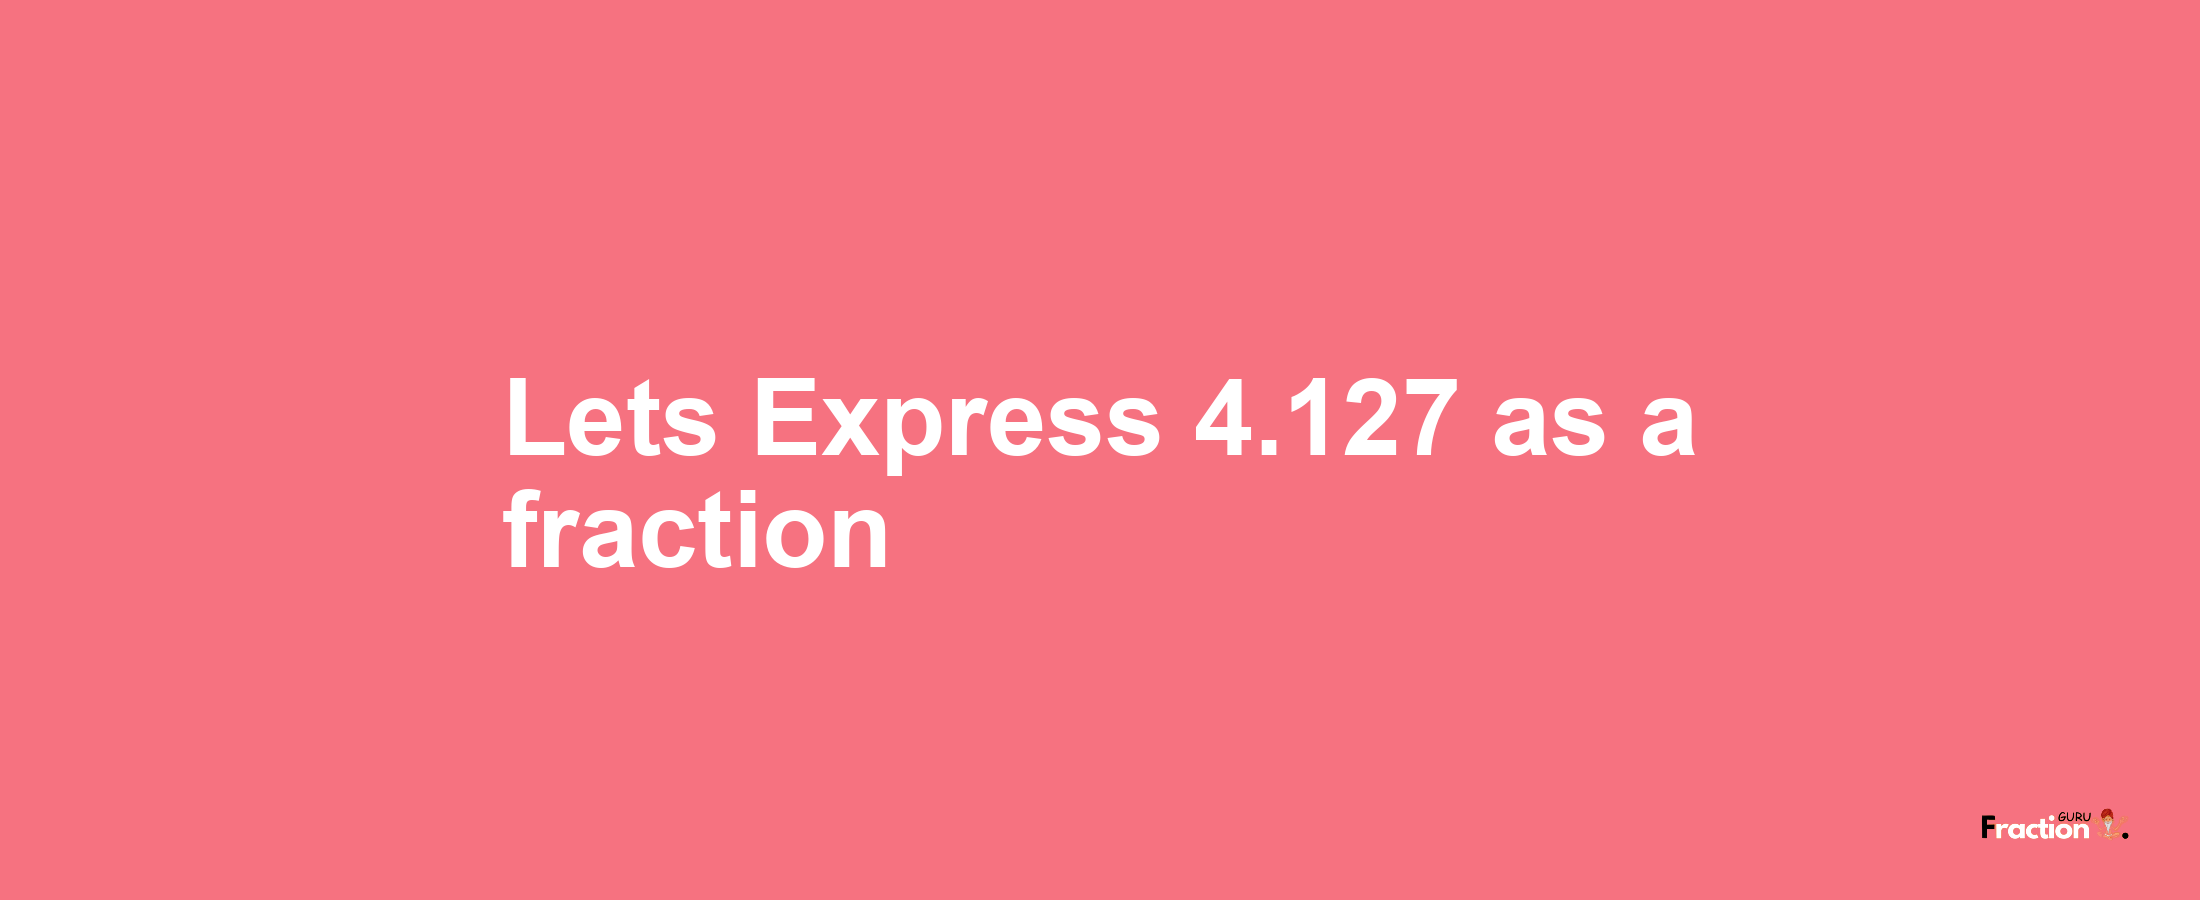 Lets Express 4.127 as afraction